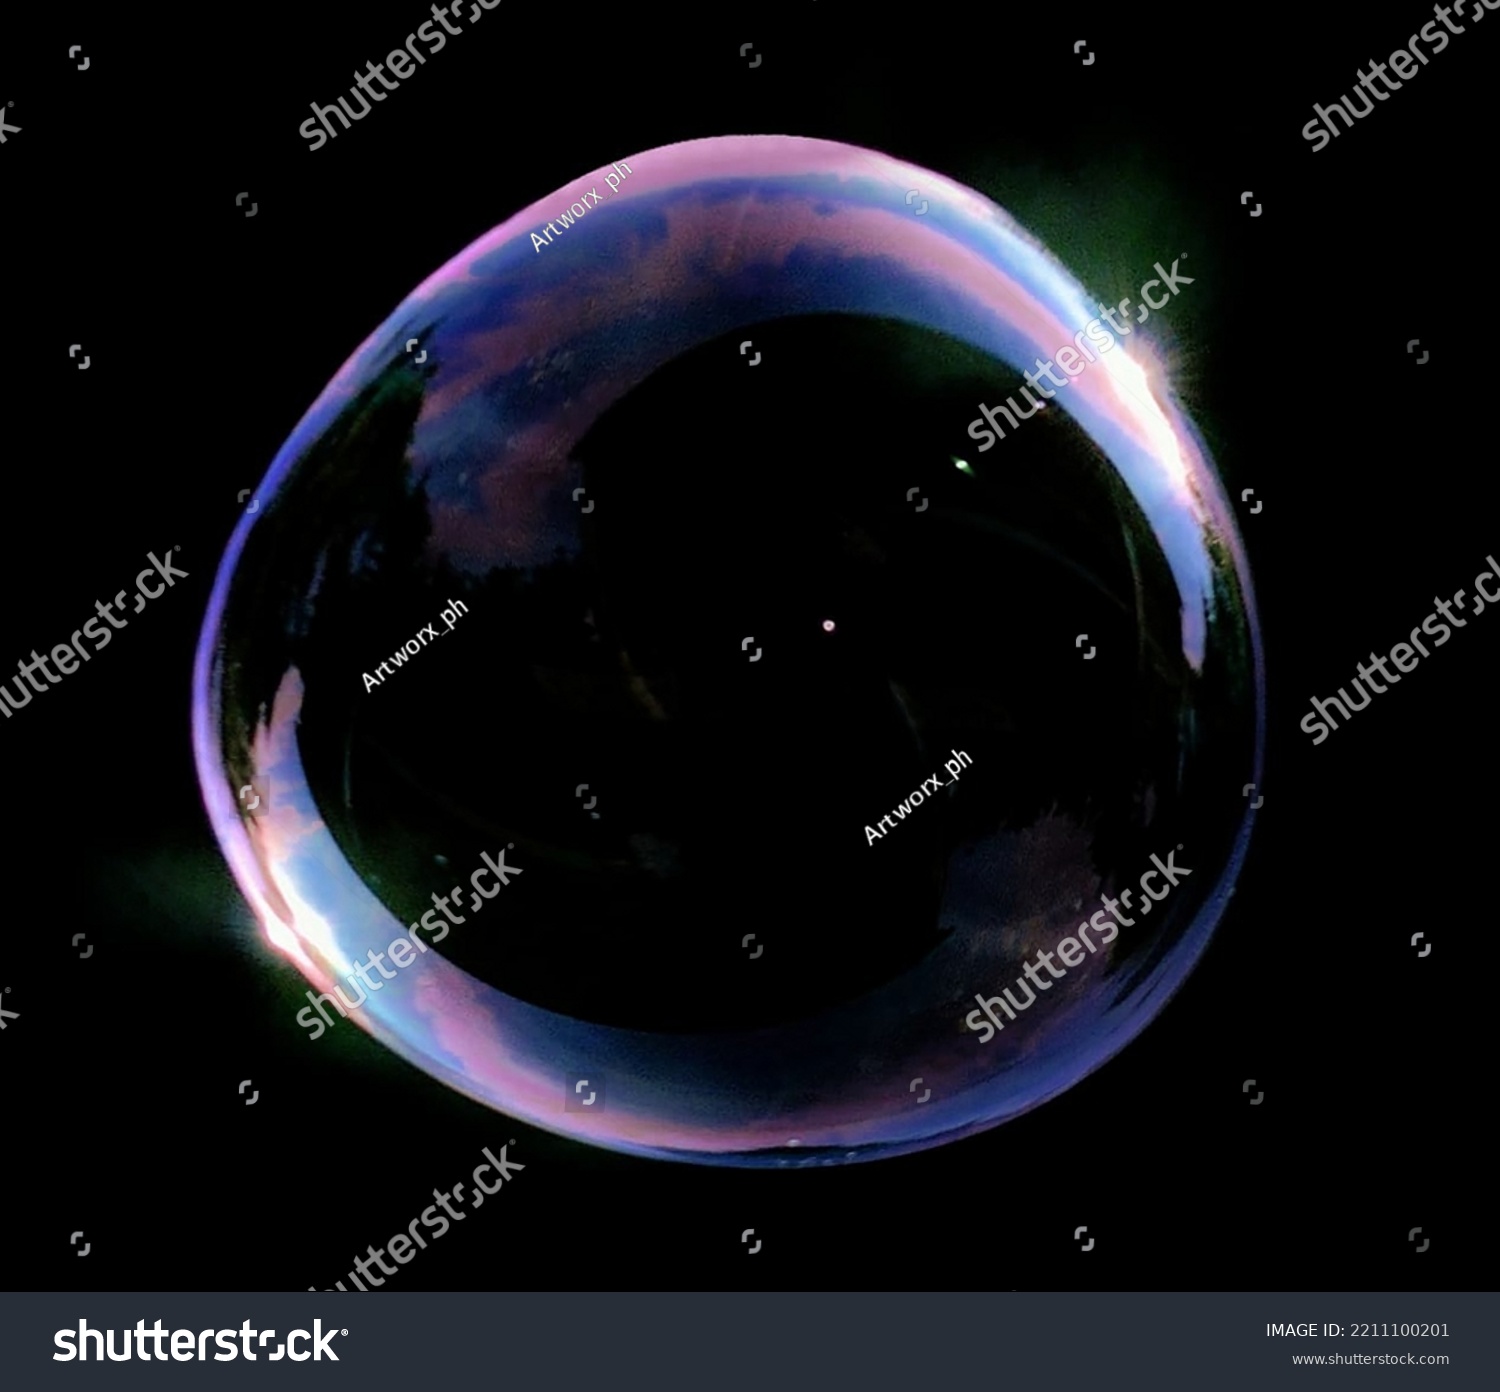 Air Bubbles Isolated on Black Background. Colorful bubbles circles abstract on black background illustration. Soap bubbles foamy realistic with rainbow colors #2211100201